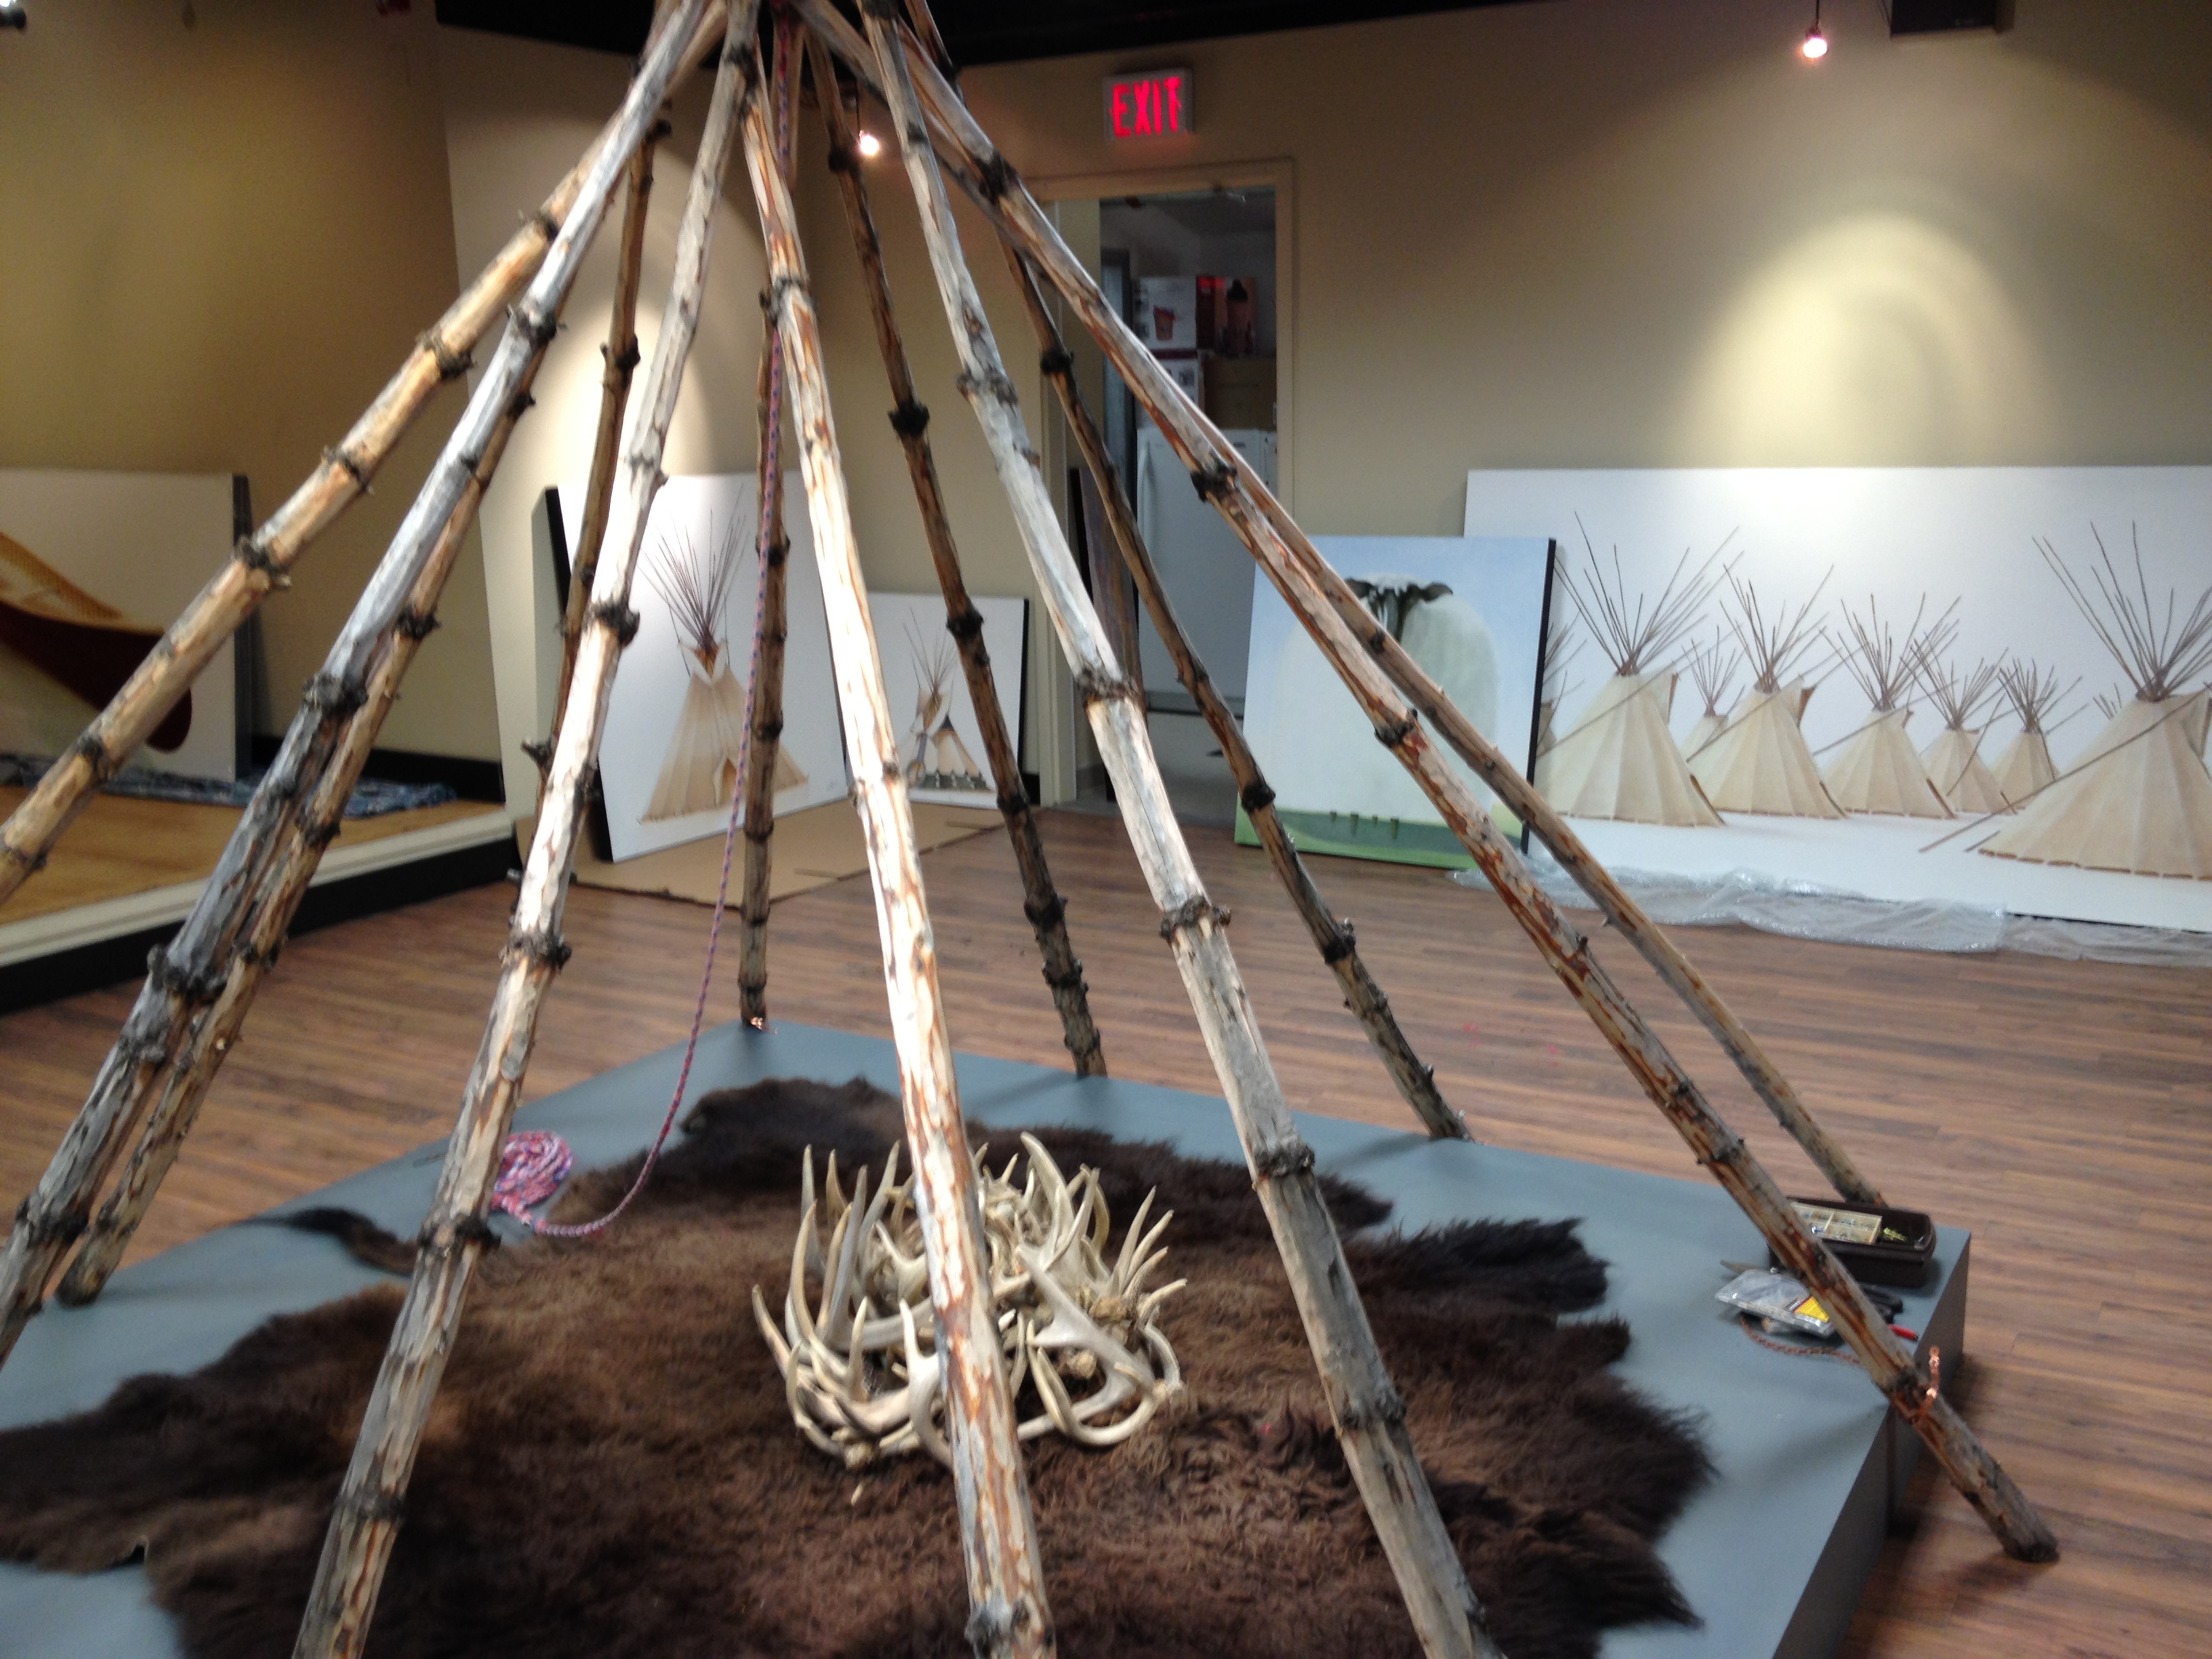 Setting up the CAMP exhibition by Janice Tanton at the Okotoks Art Gallery